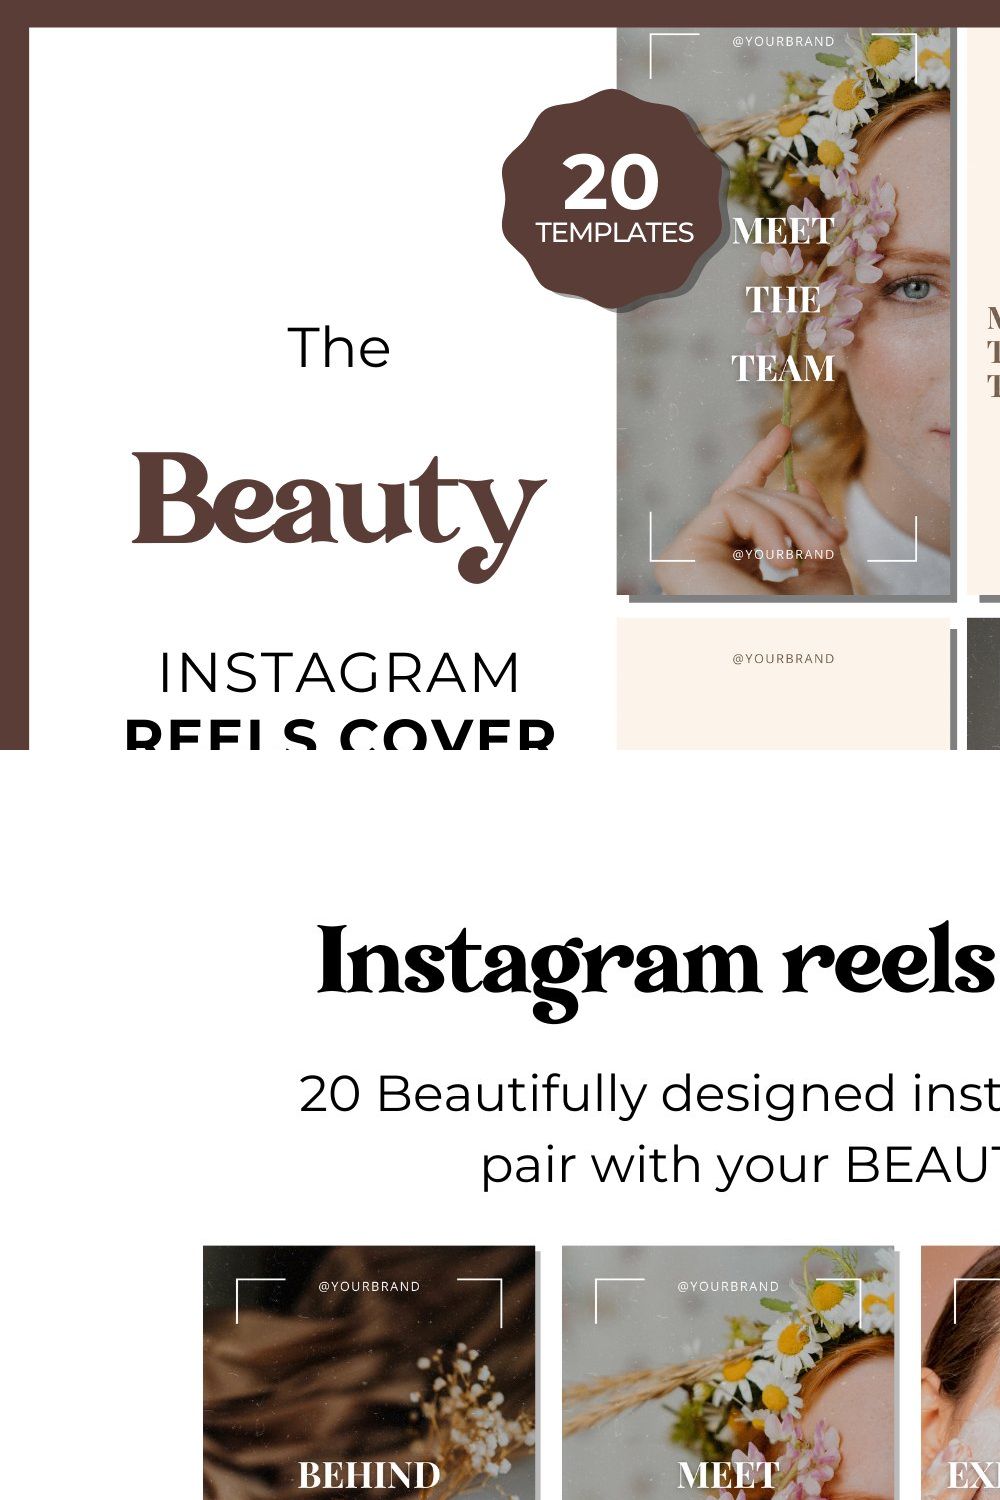 20 Beauty Instagram Reels Cover pinterest preview image.